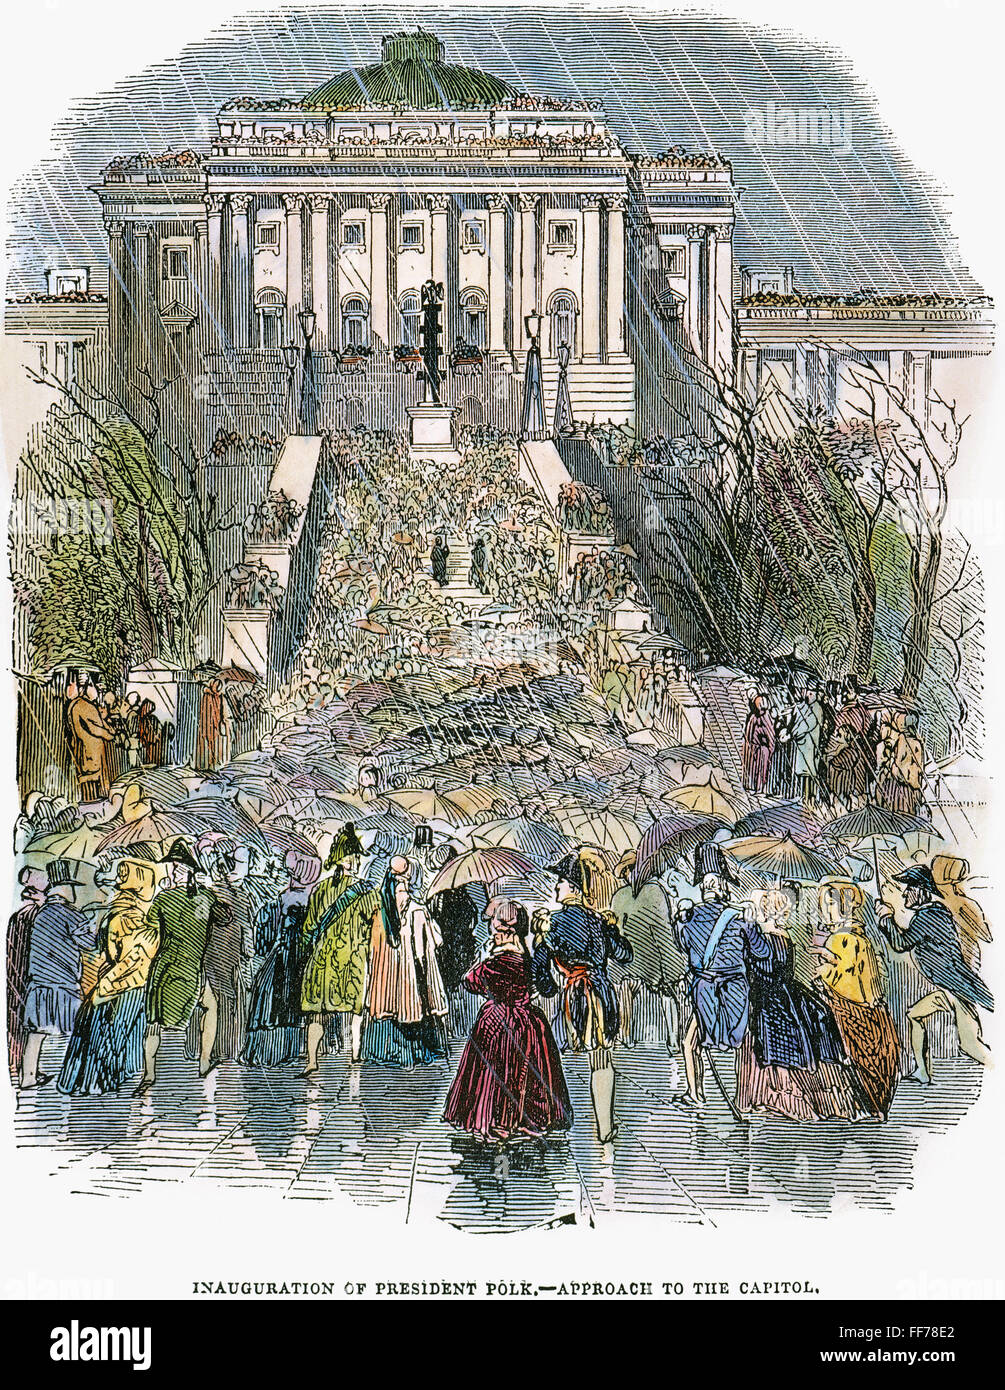 JAMES K. POLK: INAUGURATION. /nThe inauguration of James K. Polk as the 11th President of the United States on 4 March 1845: contemporary English colored engraving. Stock Photo